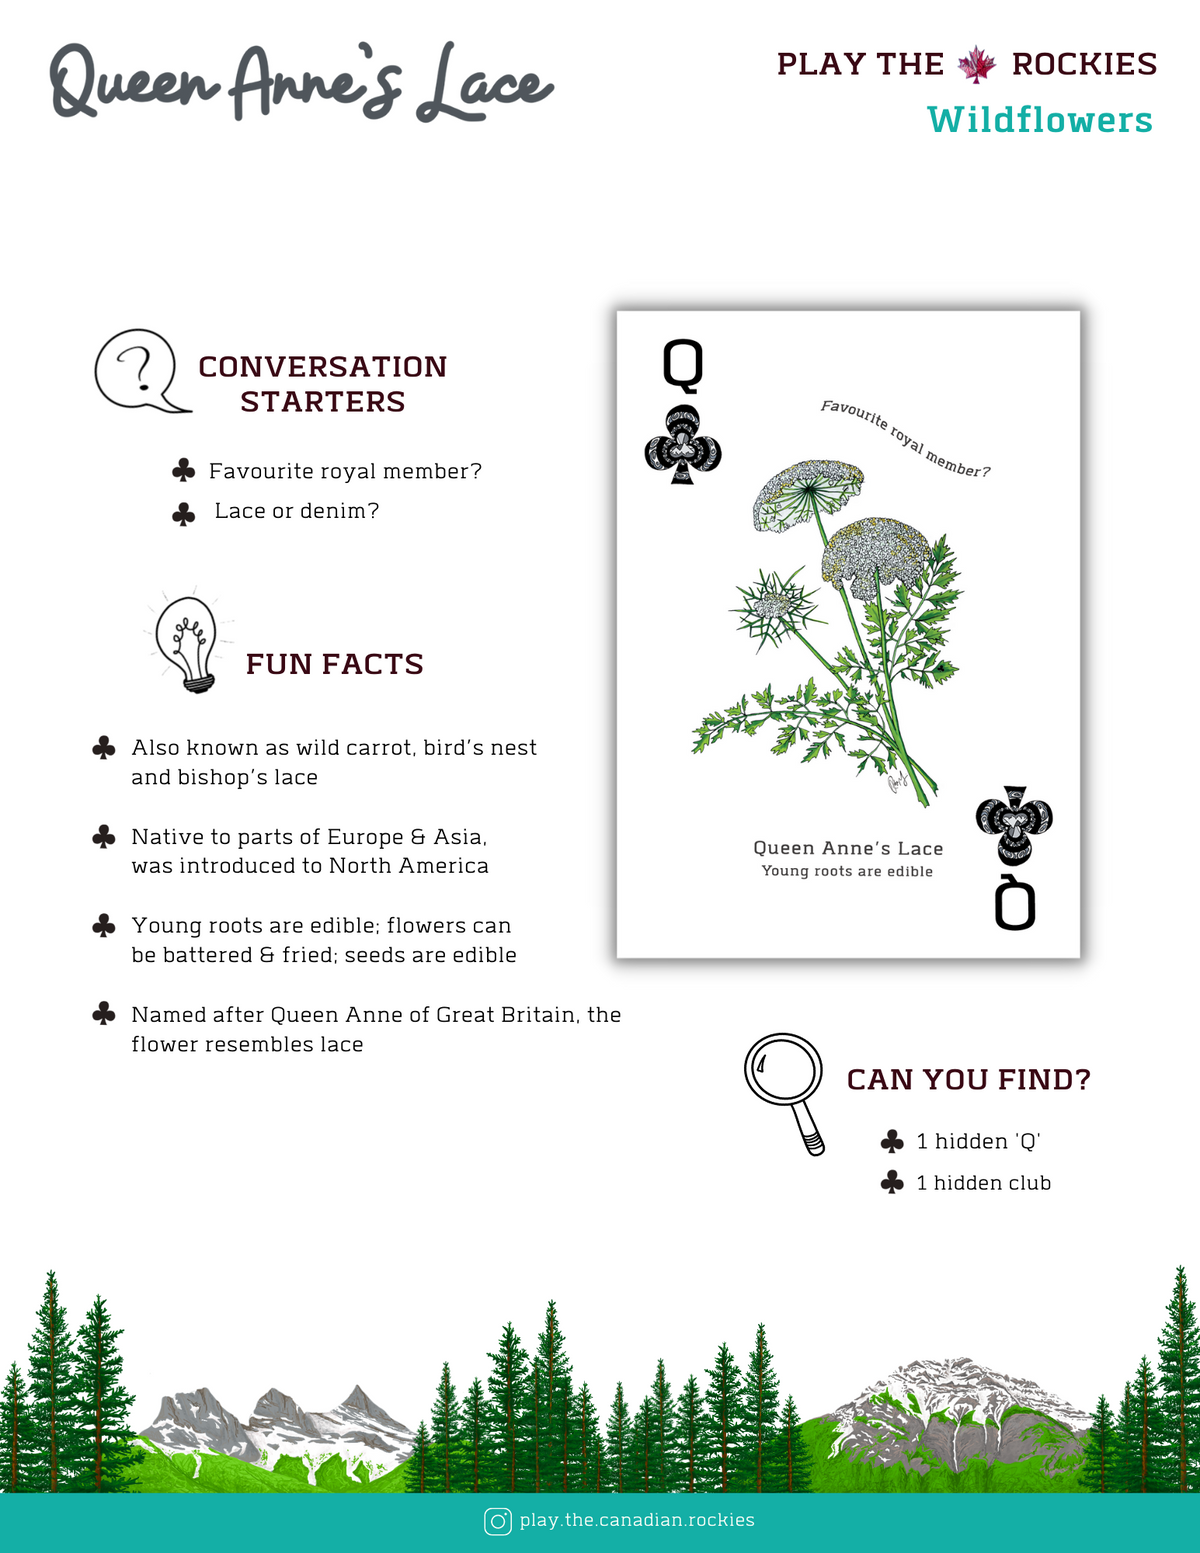 12 Queen - Queen Anne's Lace - Wildflowers - Information Sheet